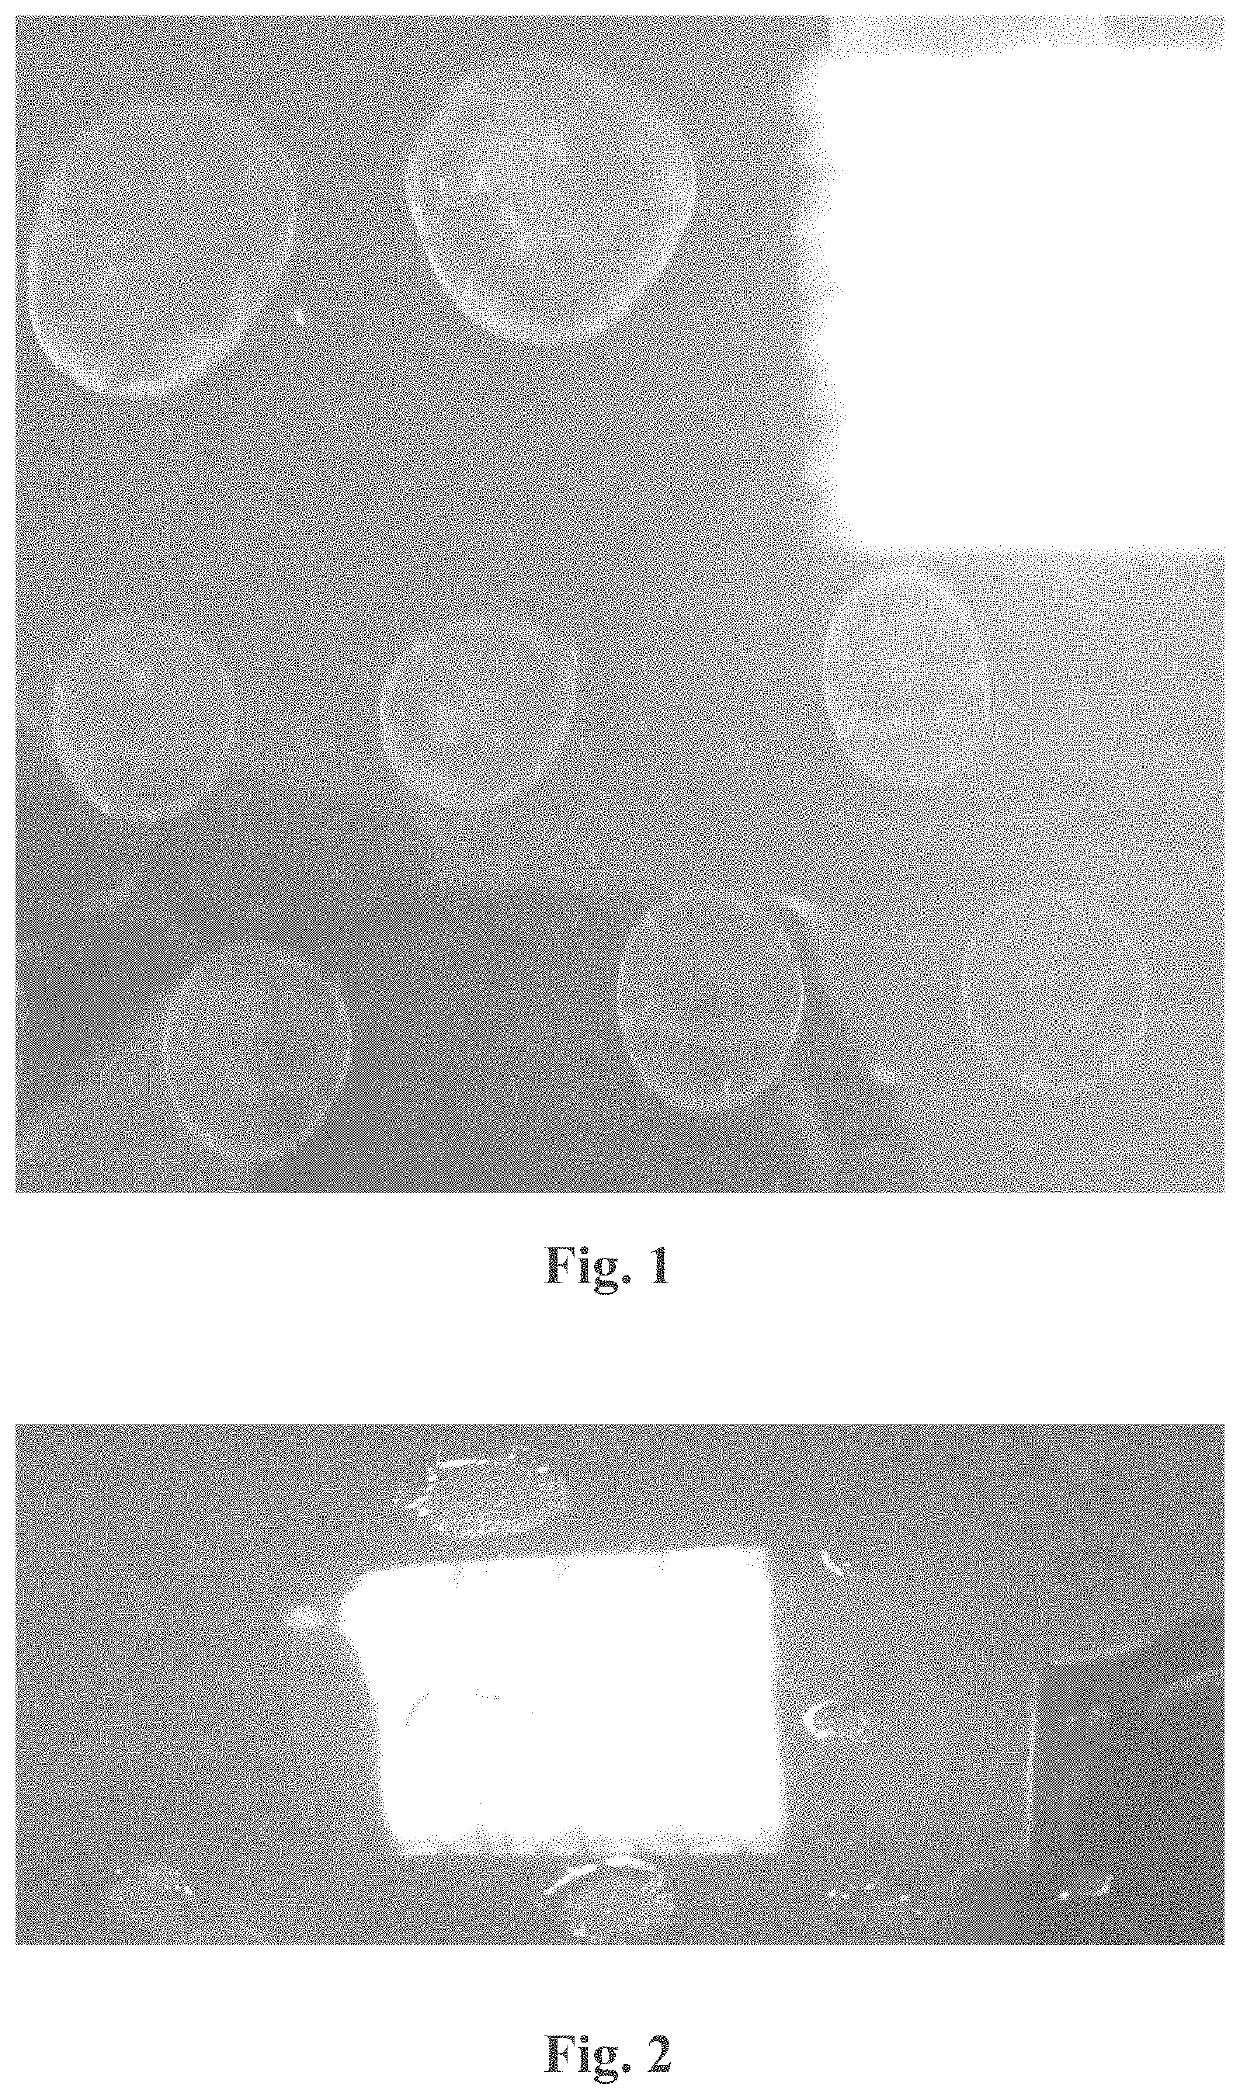 Method for preventing marks caused by drying and a vehicle washing system